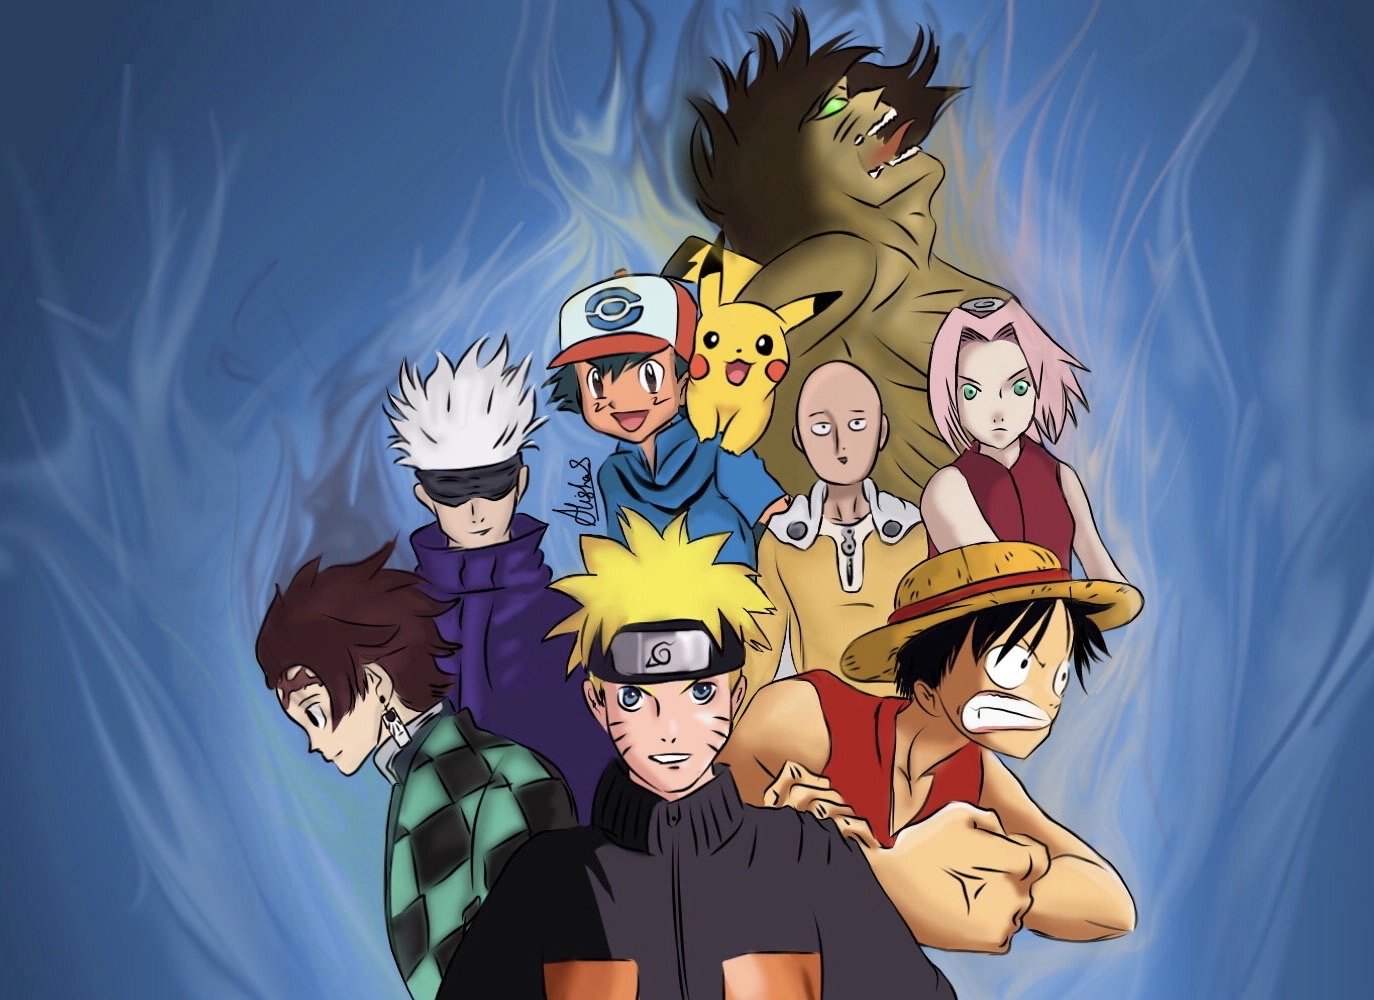 The 100+ Greatest Anime Characters Of All Time